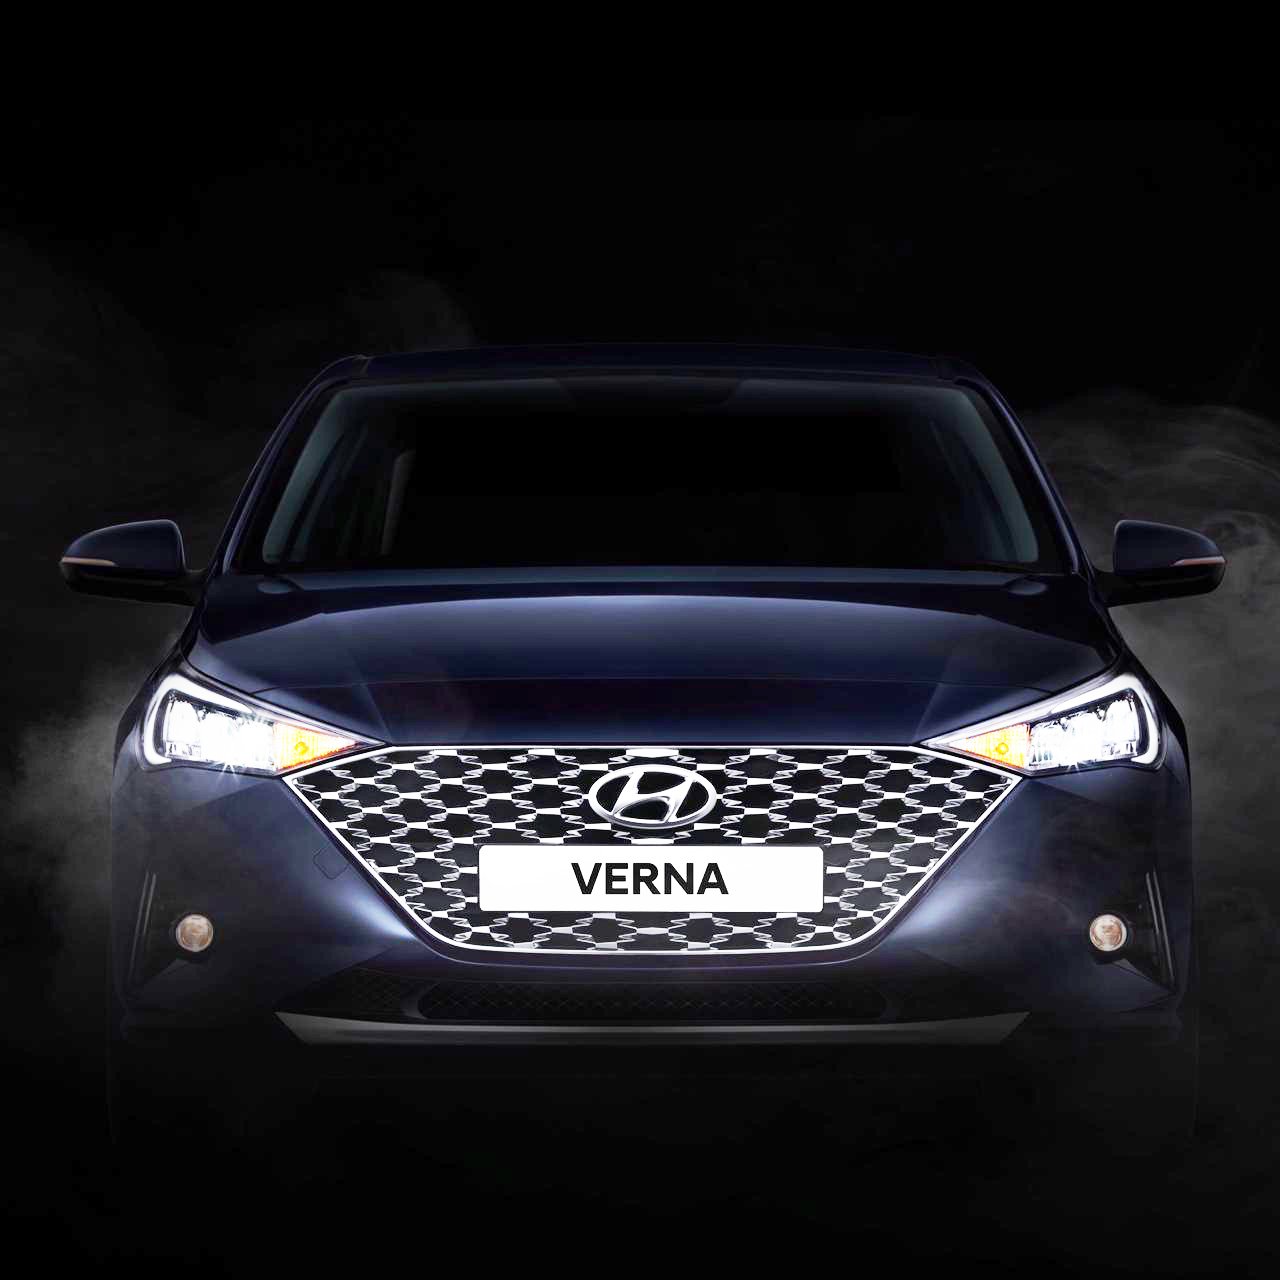 2020 Hyundai Verna Facelift Gets 1.0L Turbo Petrol with 7-DCT, Almost Revealed Thru Official Pics